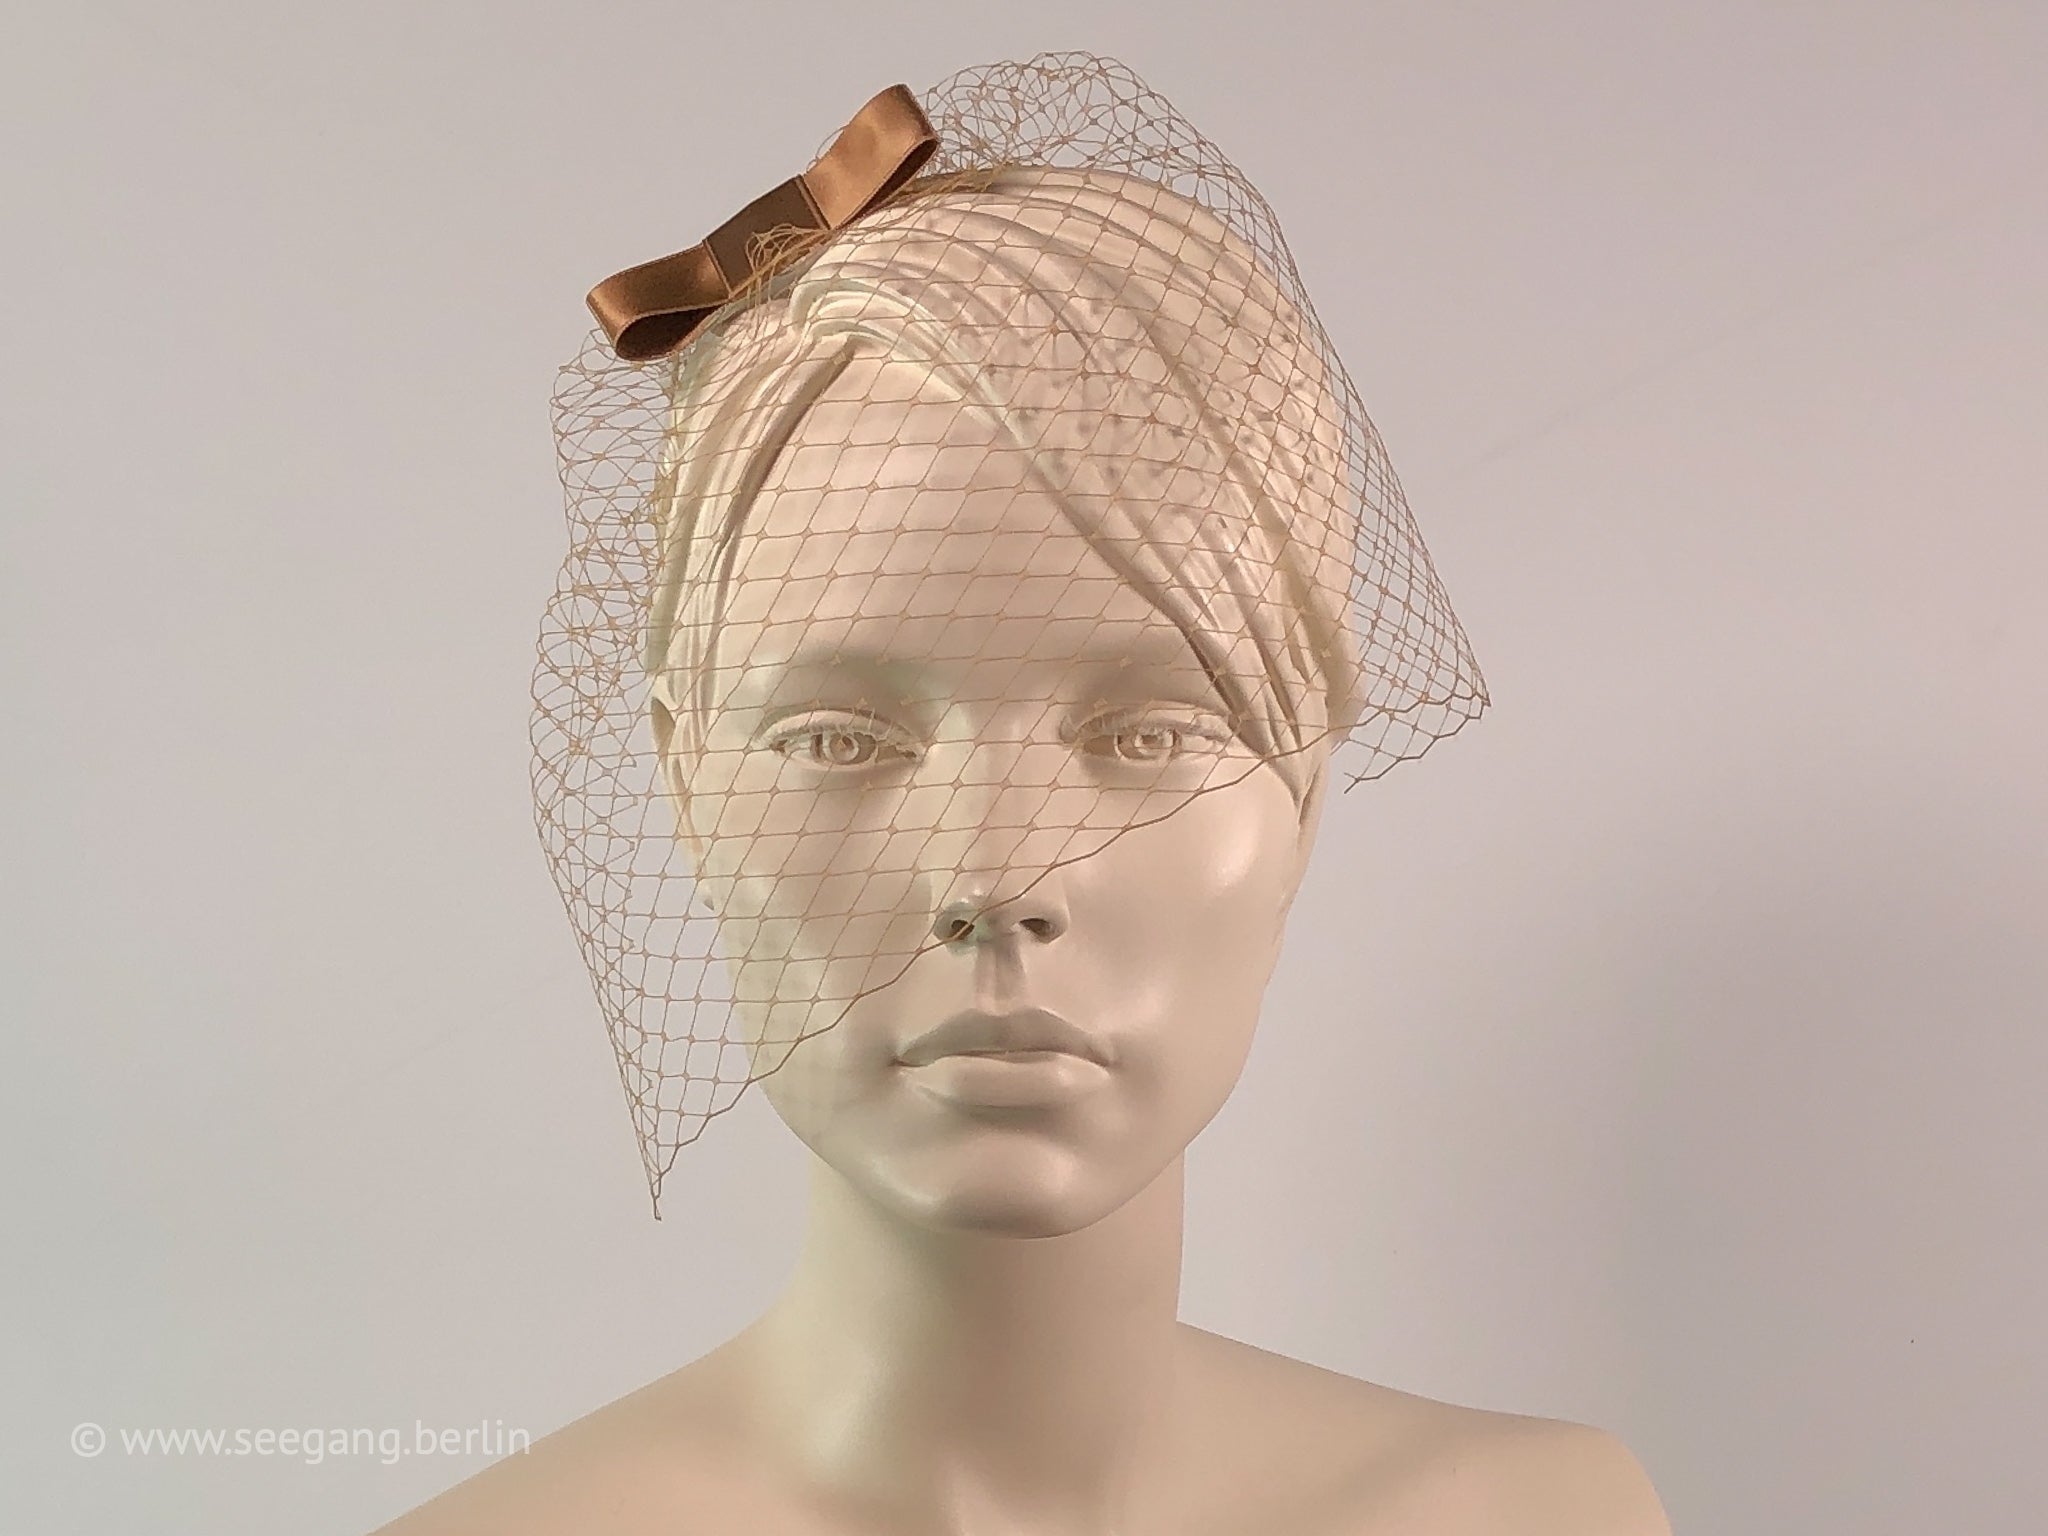 VEIL HEADDRESS IN SHADES OF BROWN, BEIGE AND NUDE SHADES